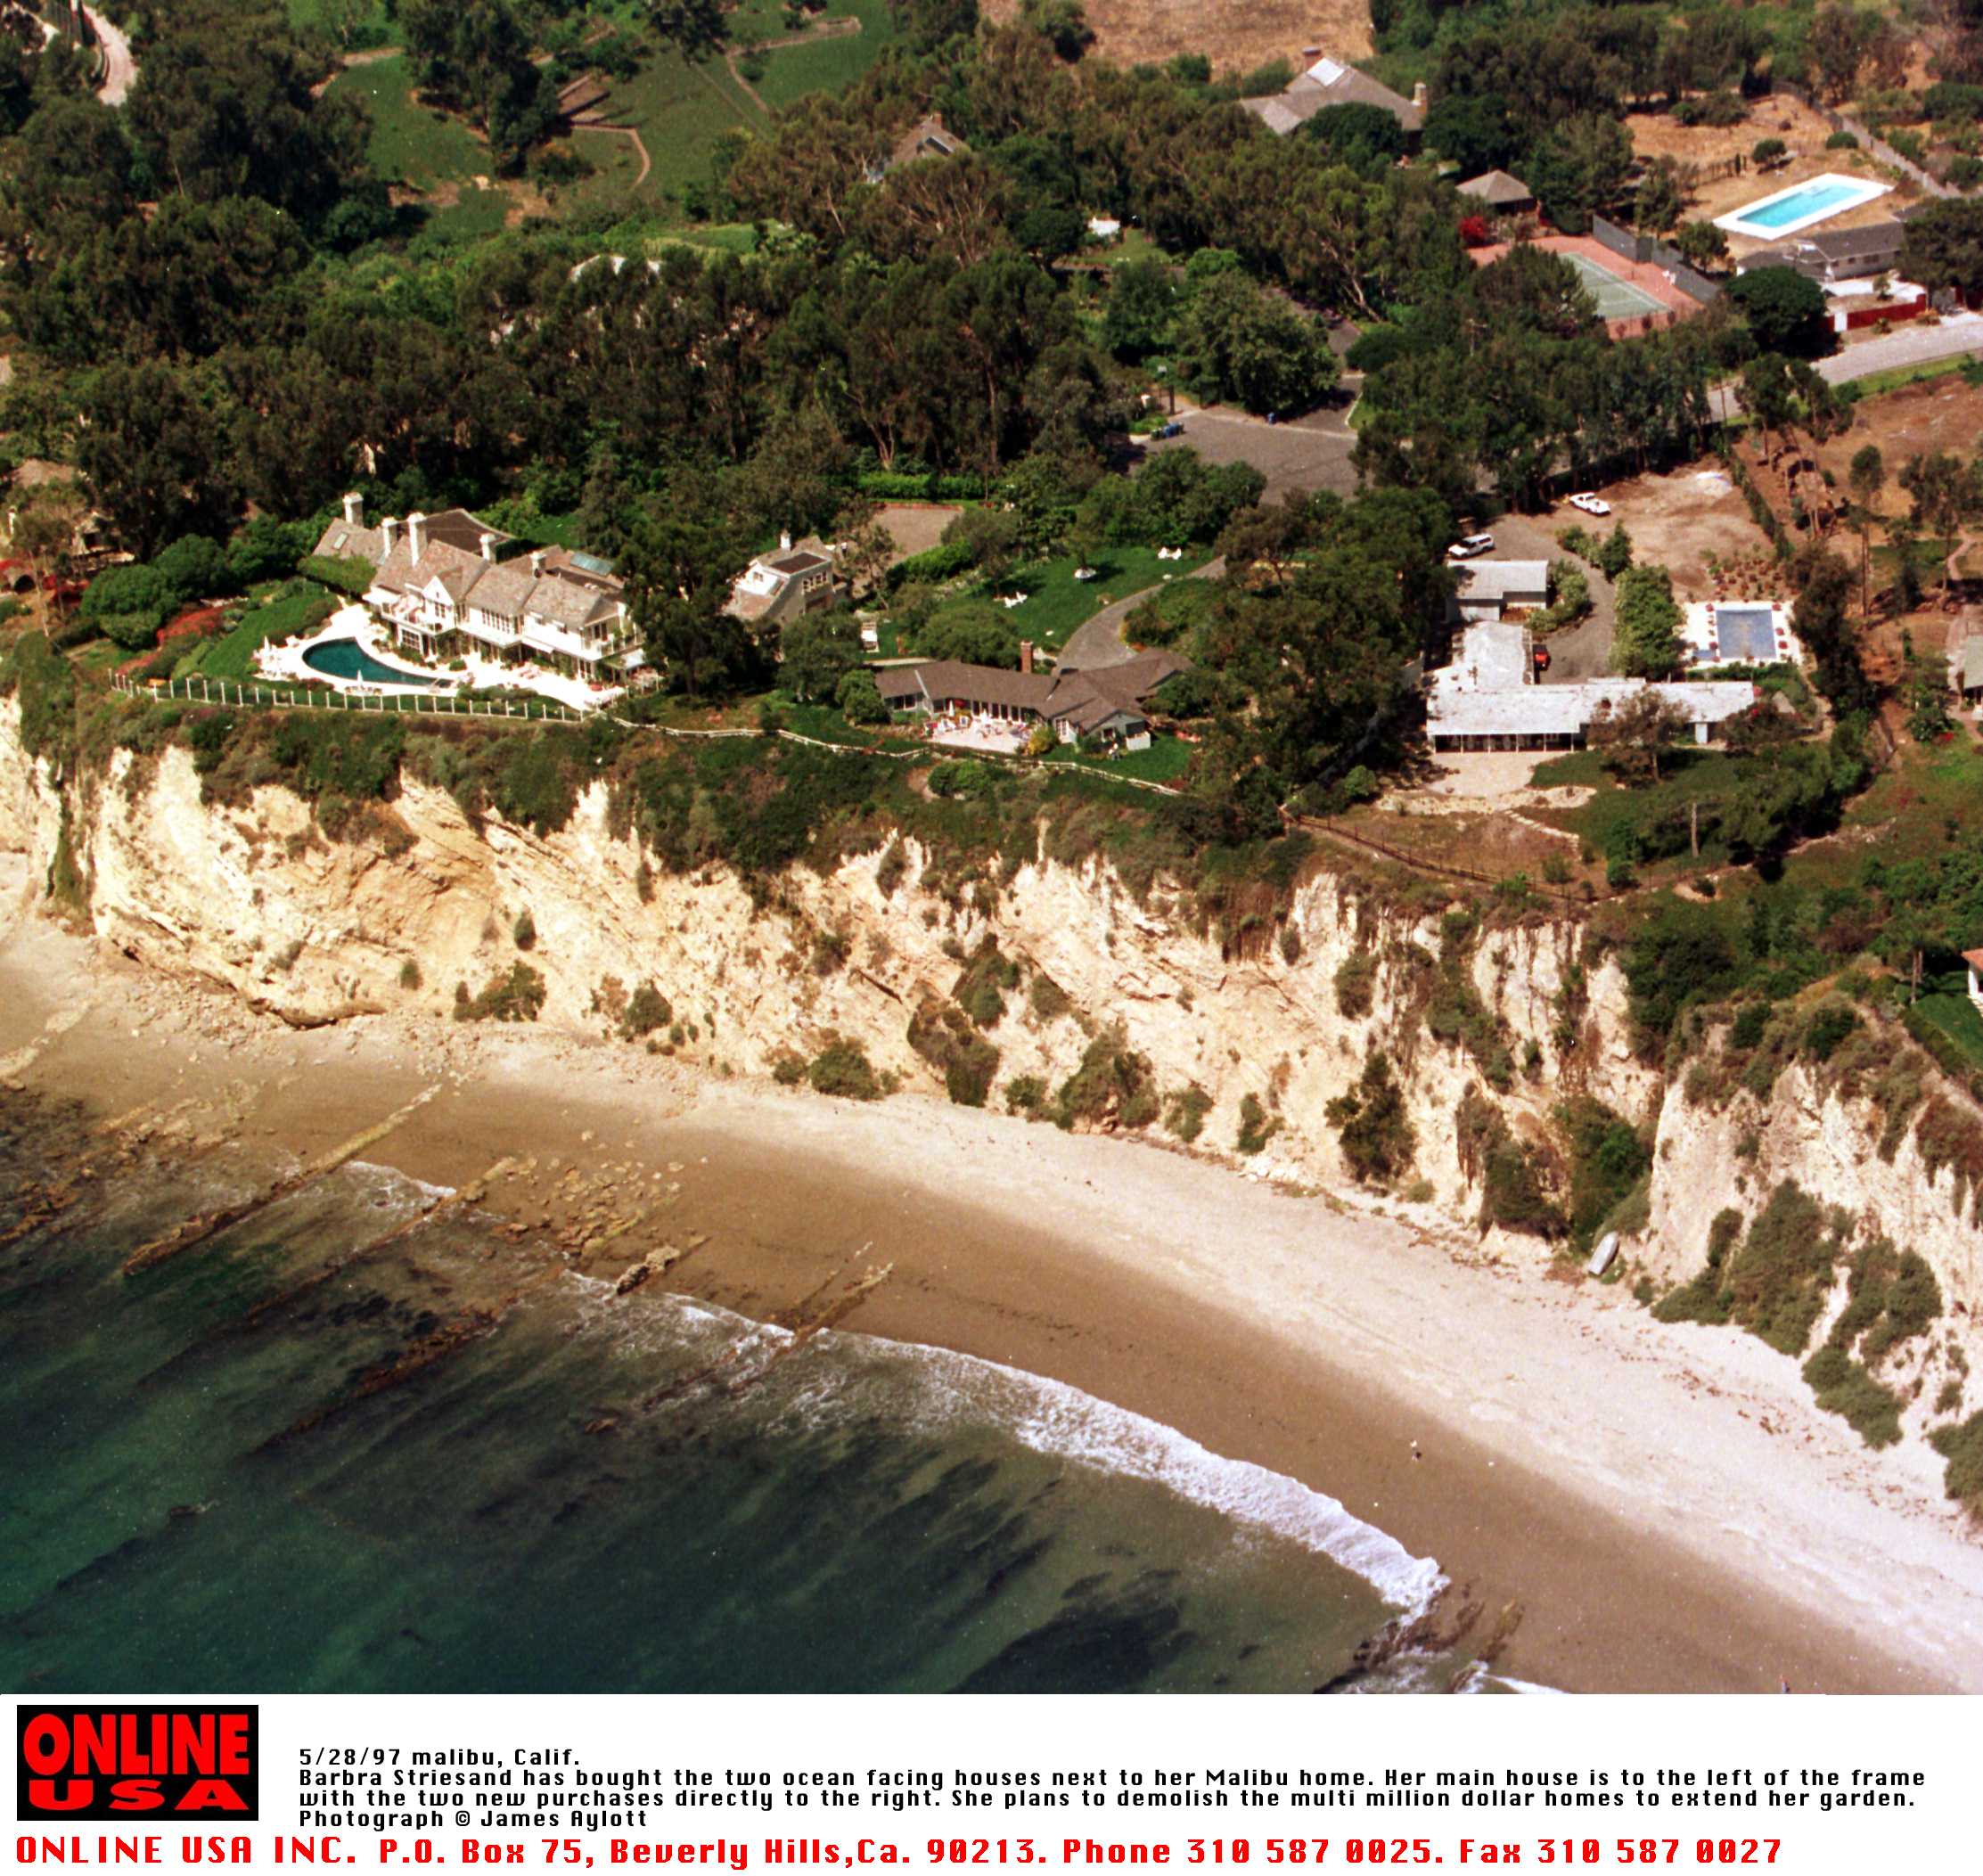 Barbra Streisand's home as captured on May 28, 1997 in Malibu, California | Source: Getty Images